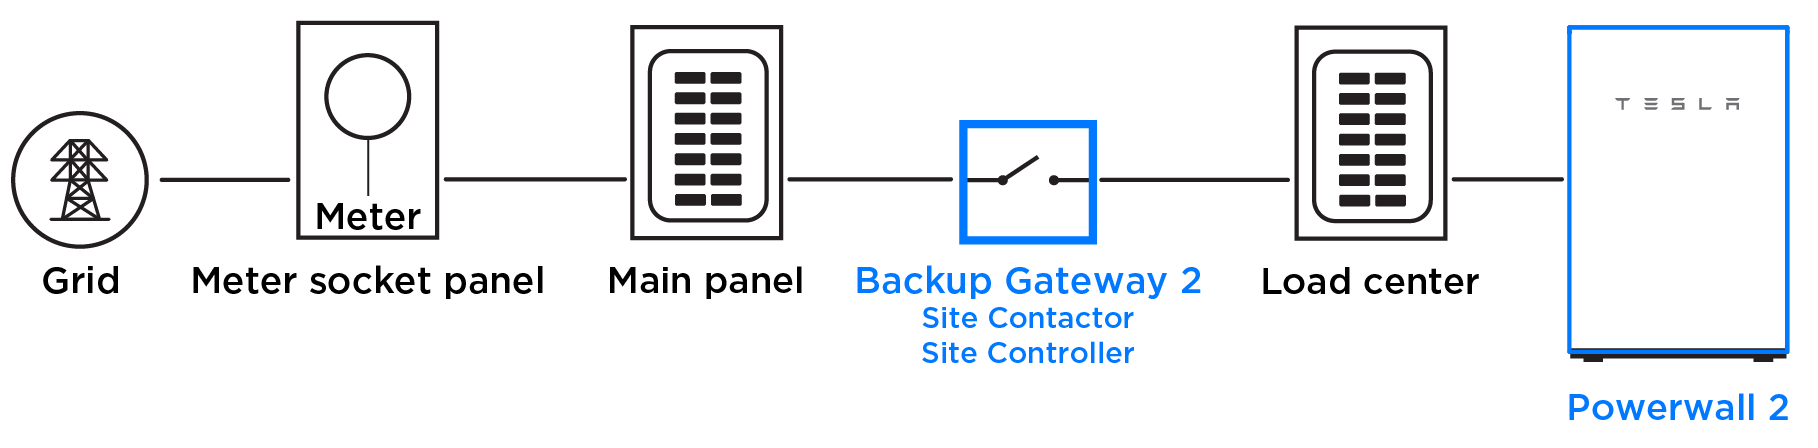 System Overview Diagram of Backup Gateway 2